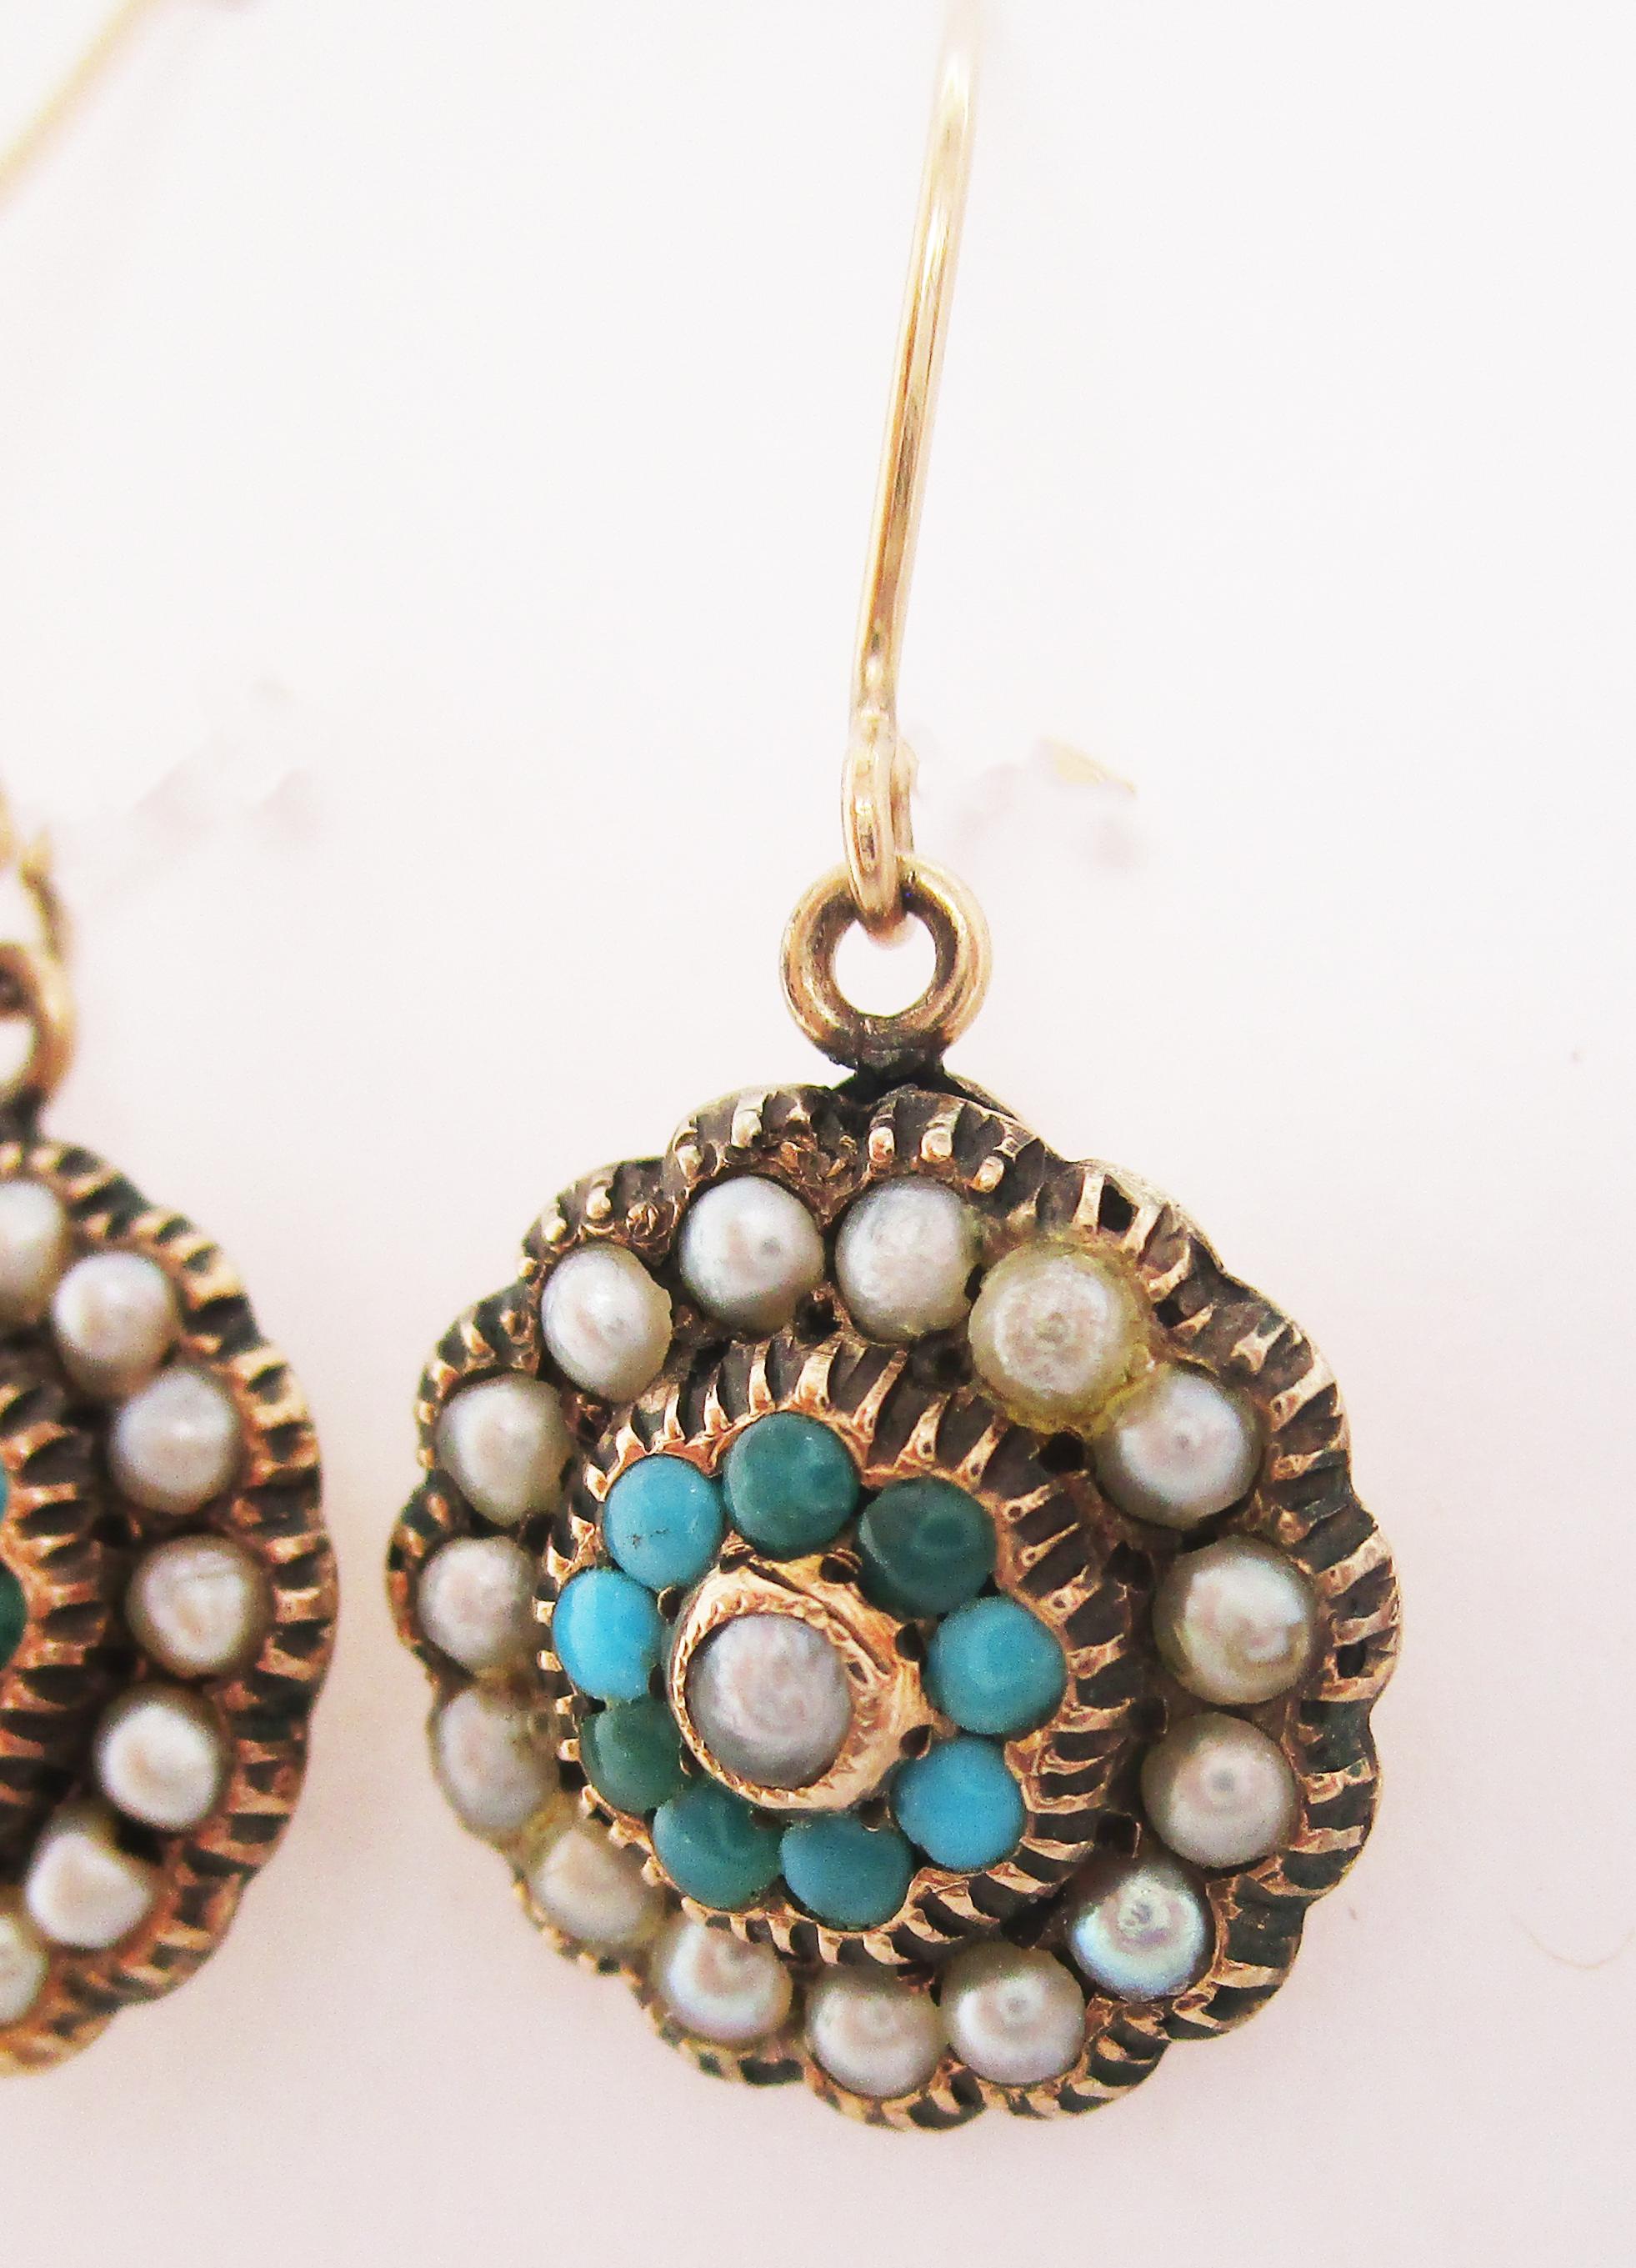 These beautiful Victorian earrings feature bright gold, richly colored turquoise, and soft white seed pearls all in an elegant dangle design. The earrings have a gorgeous concentric circle design featuring a pearl center framed by a row of turquoise